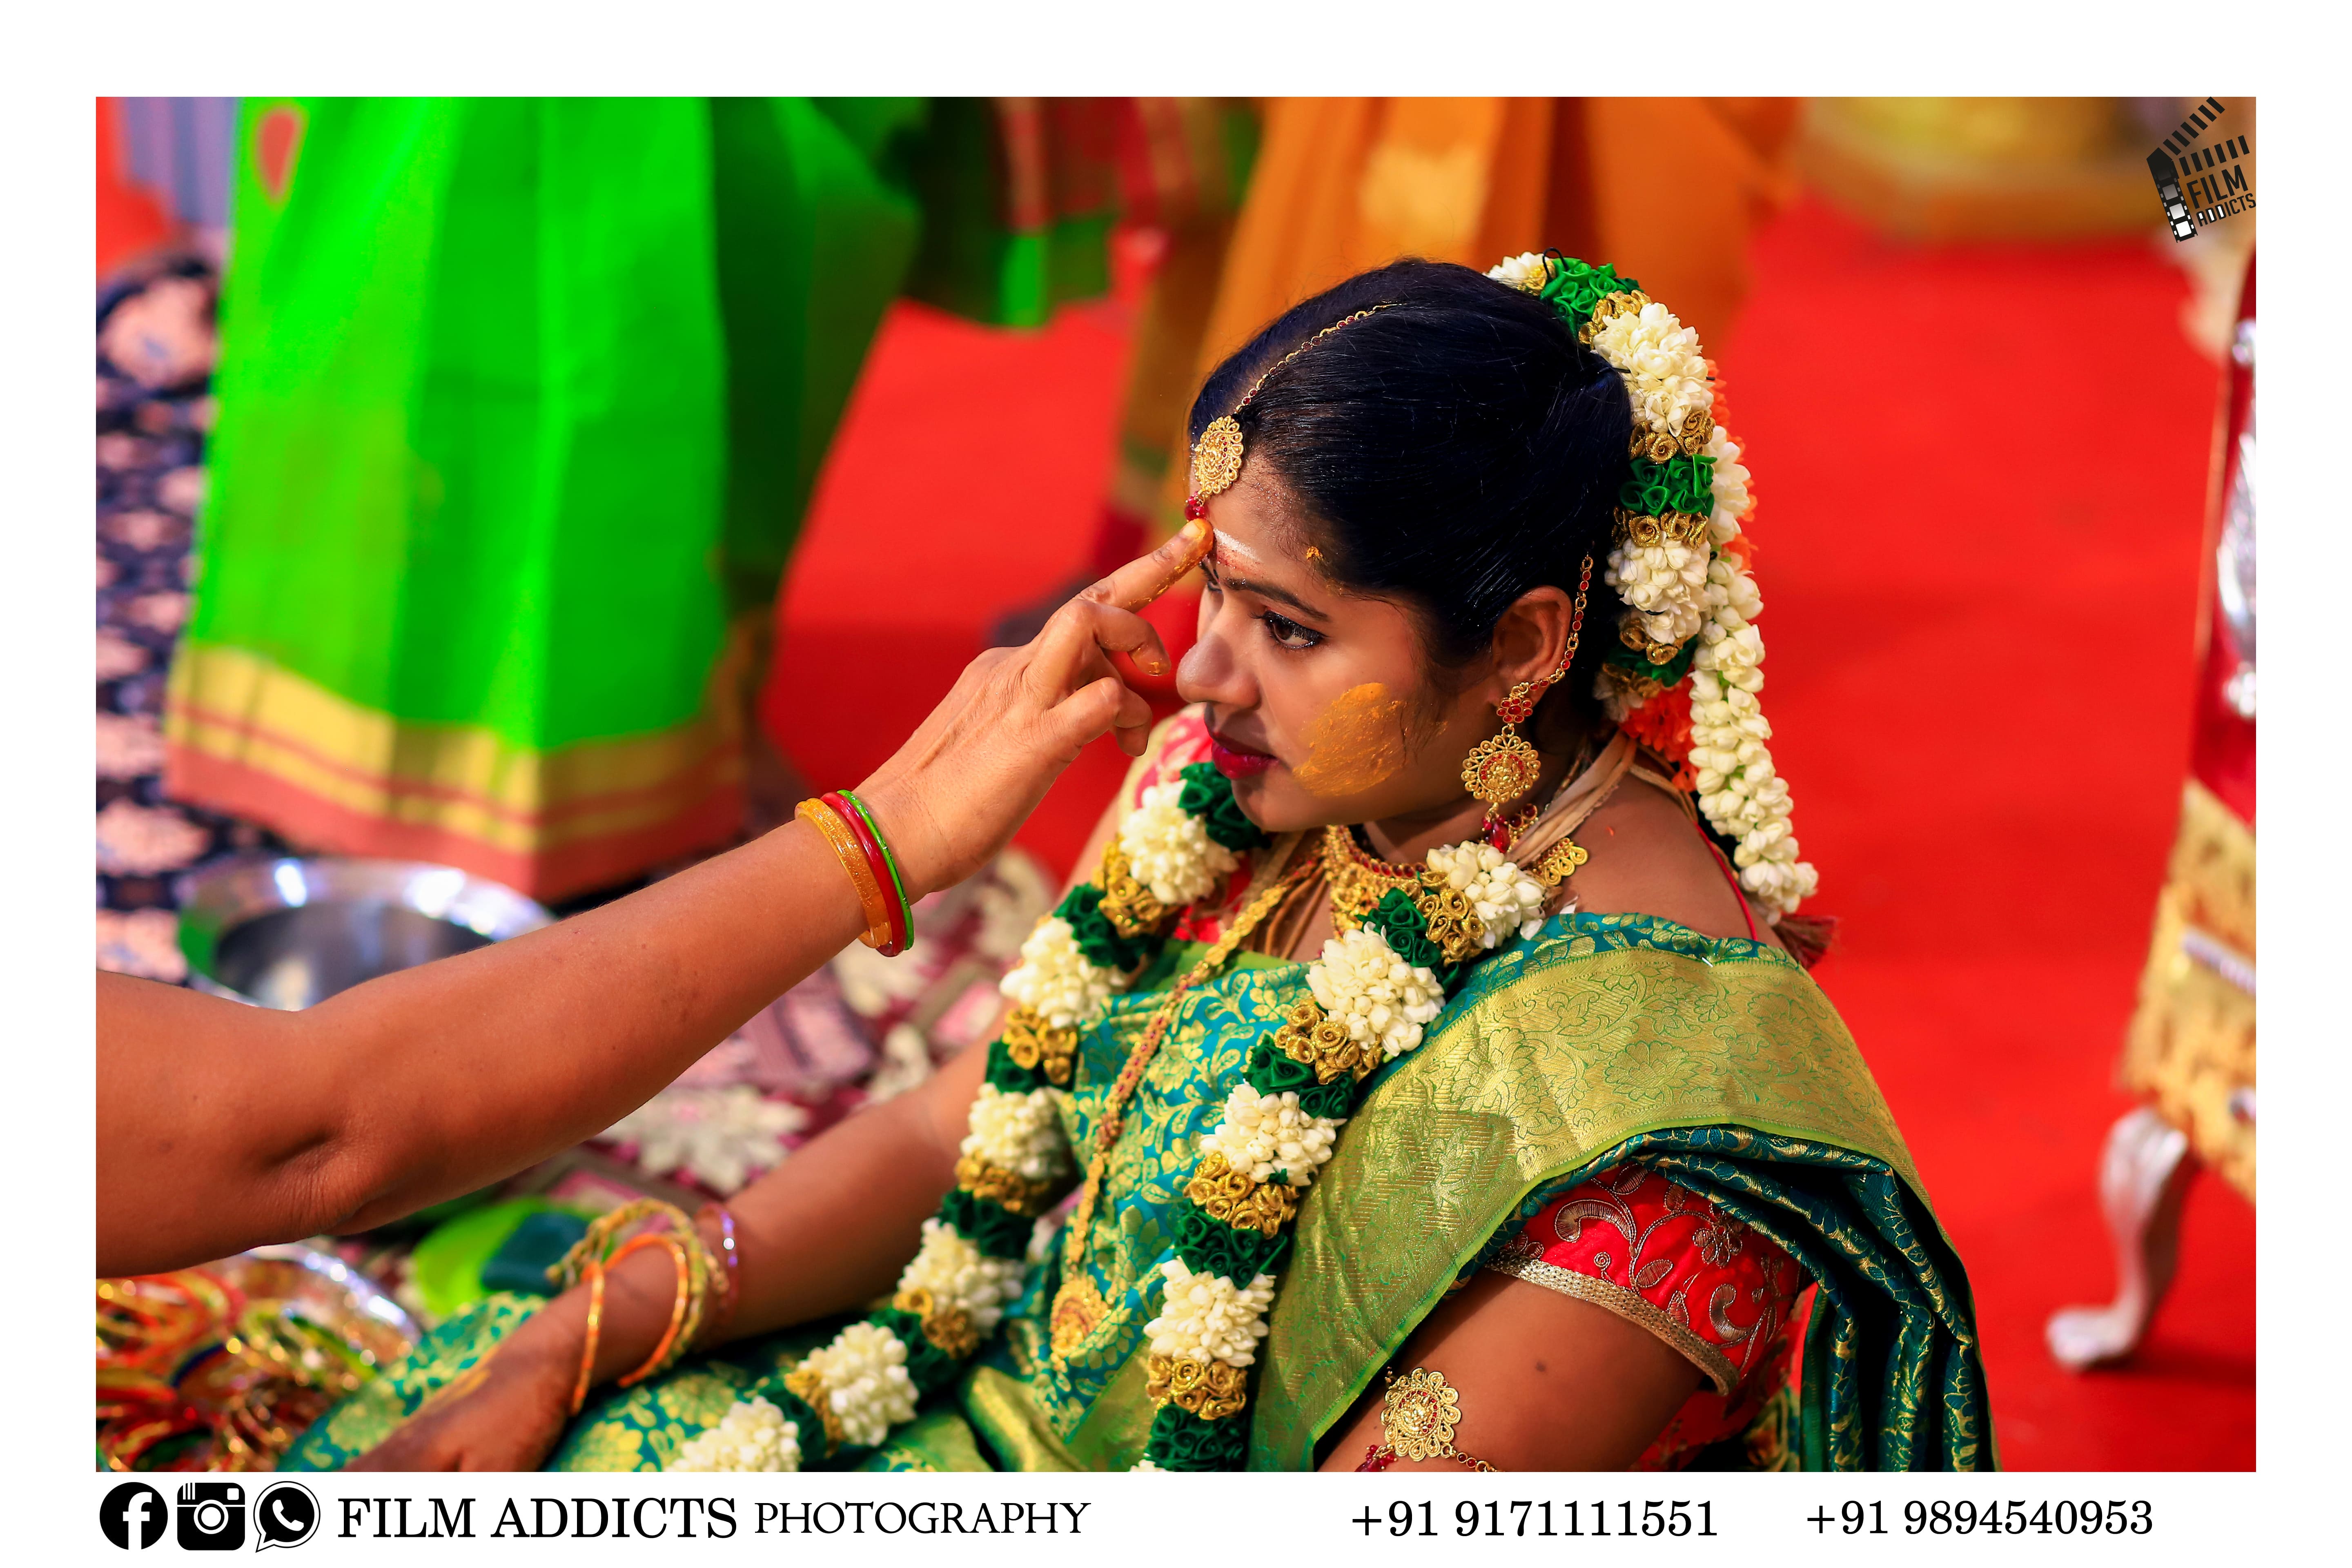 best maternity photographers in Sivaganga,best candid photographers in Sivaganga,best candid photography in Sivaganga,best maternity photographers in Sivaganga,best photographers in Sivaganga,best maternity videographers in Sivaganga,best candid video in Sivaganga,best candid maternity photographers in Sivaganga,maternity photographers in Sivaganga,best maternity photographers in tamilnadu, Maternity-Photographer-Sivaganga, best-maternity-photography-in-Sivaganga, candid-photographer-in-Sivaganga, Candid Photographer Chennai, Maternity Photographer Chennai, Maternity Photographer Coimbatore, Maternity-Photographer-in-Sivaganga